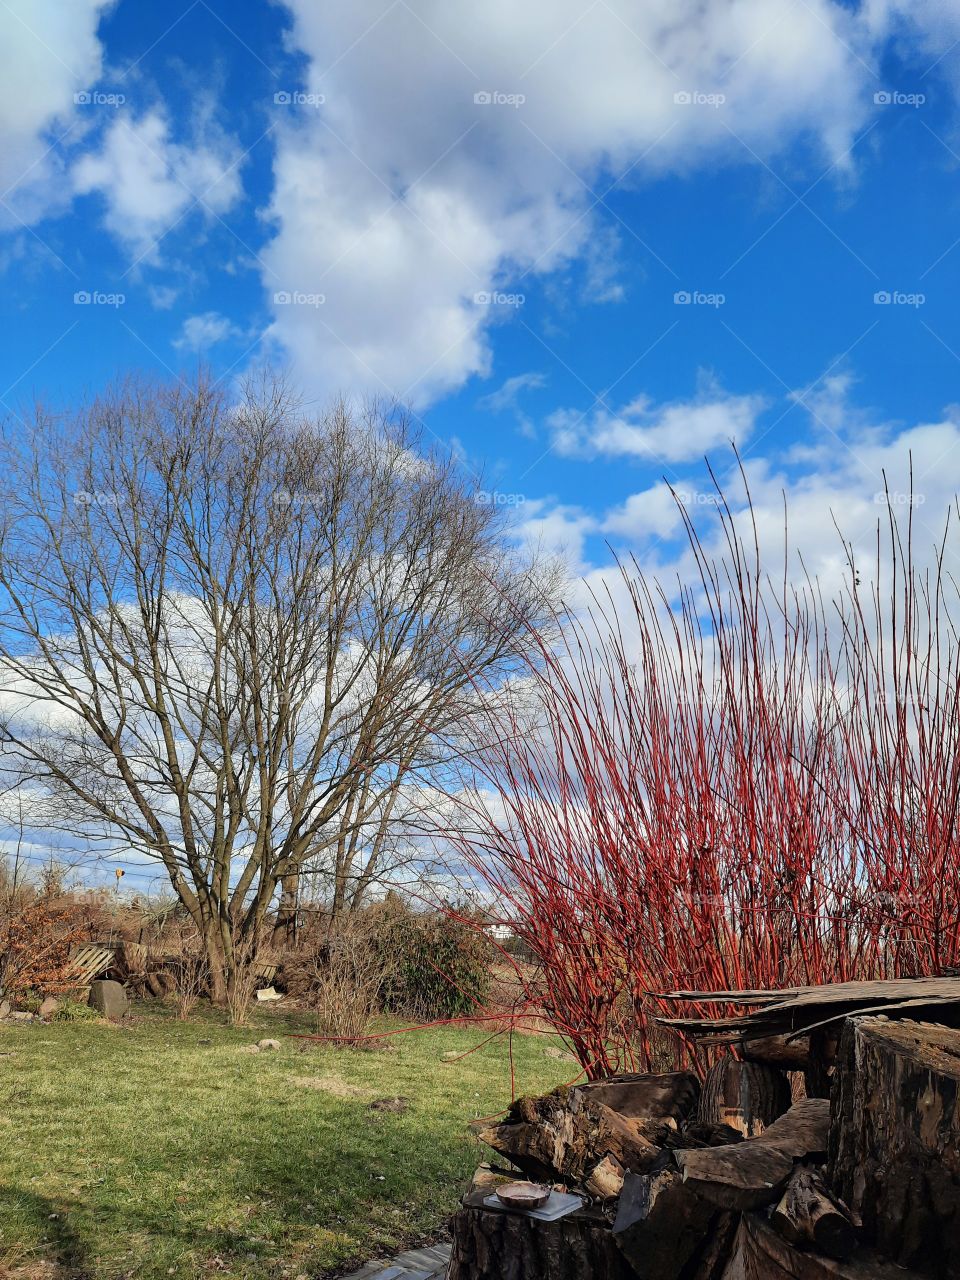 early sprintime - red branches if dogwood against blue sky